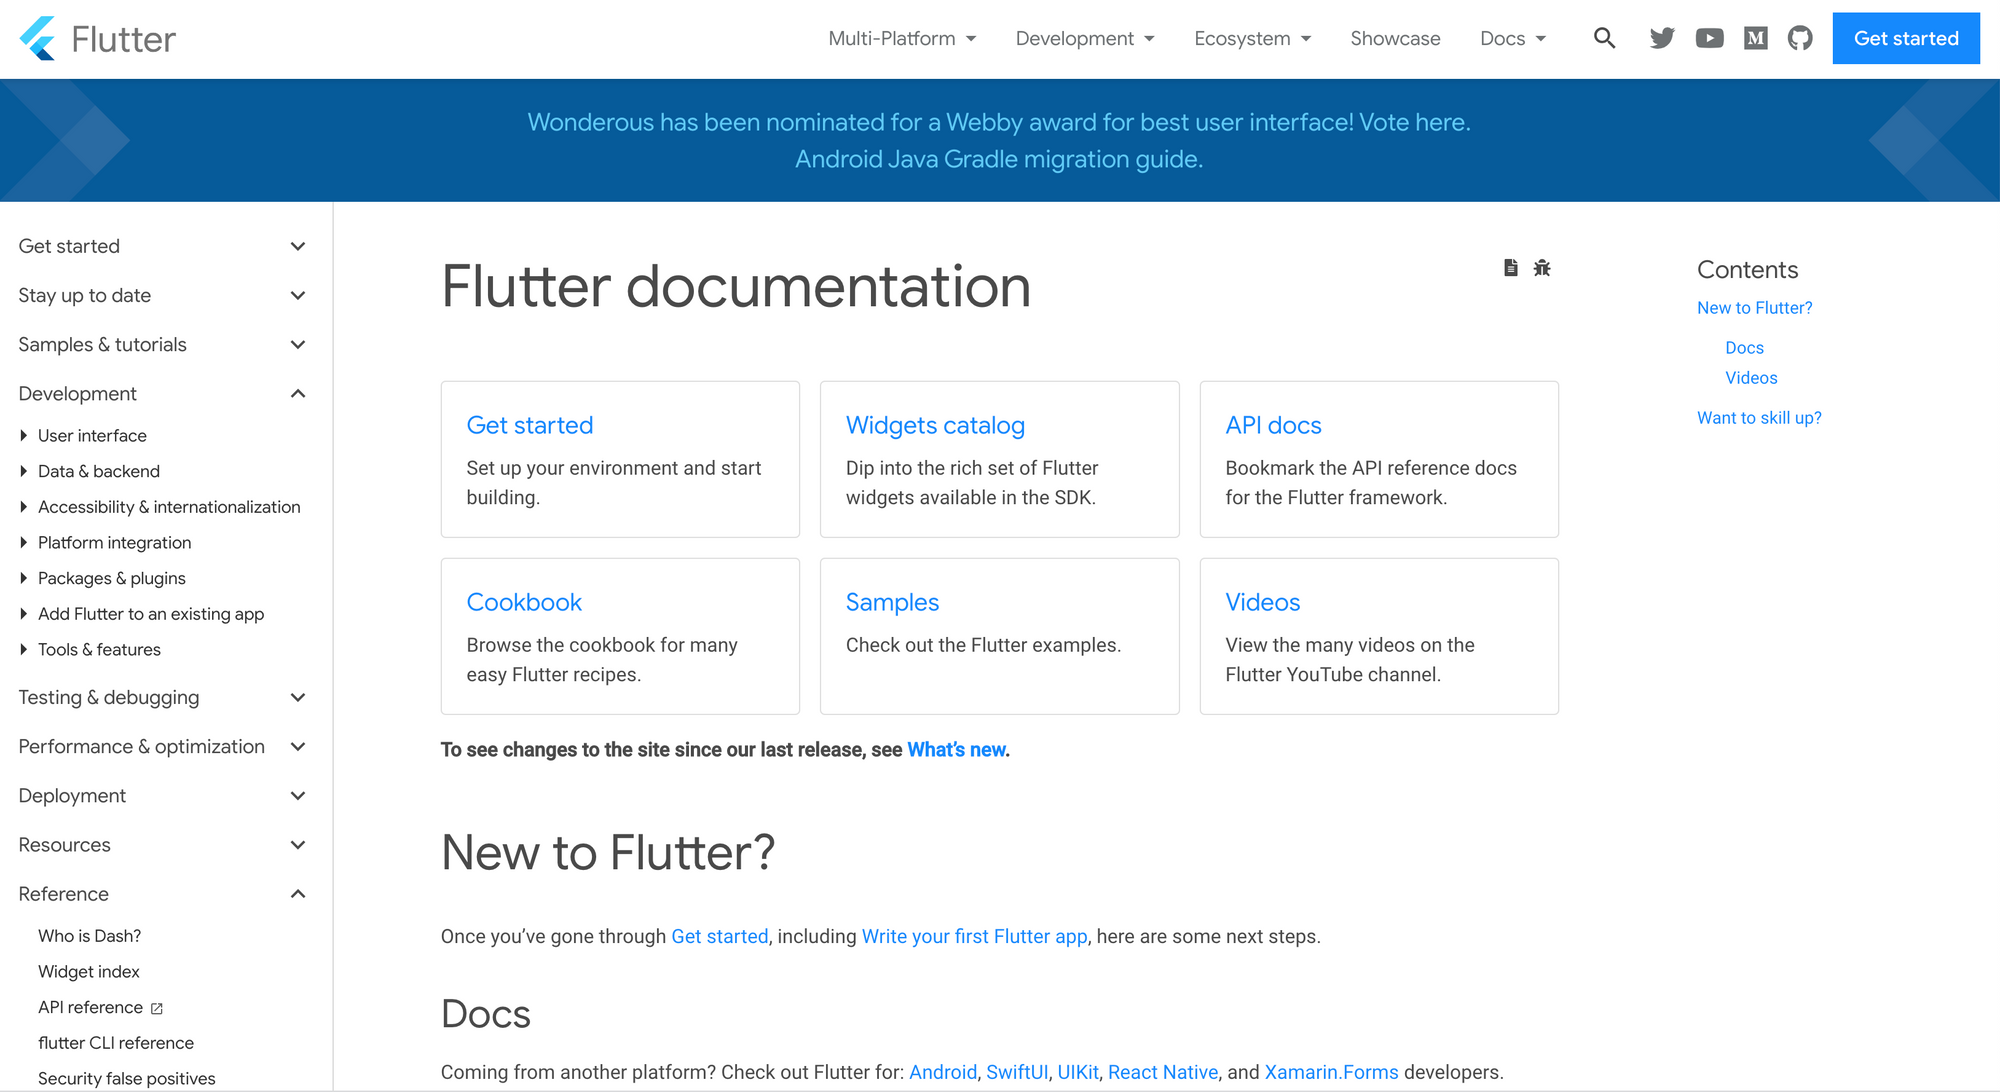 Recommended flutter resources